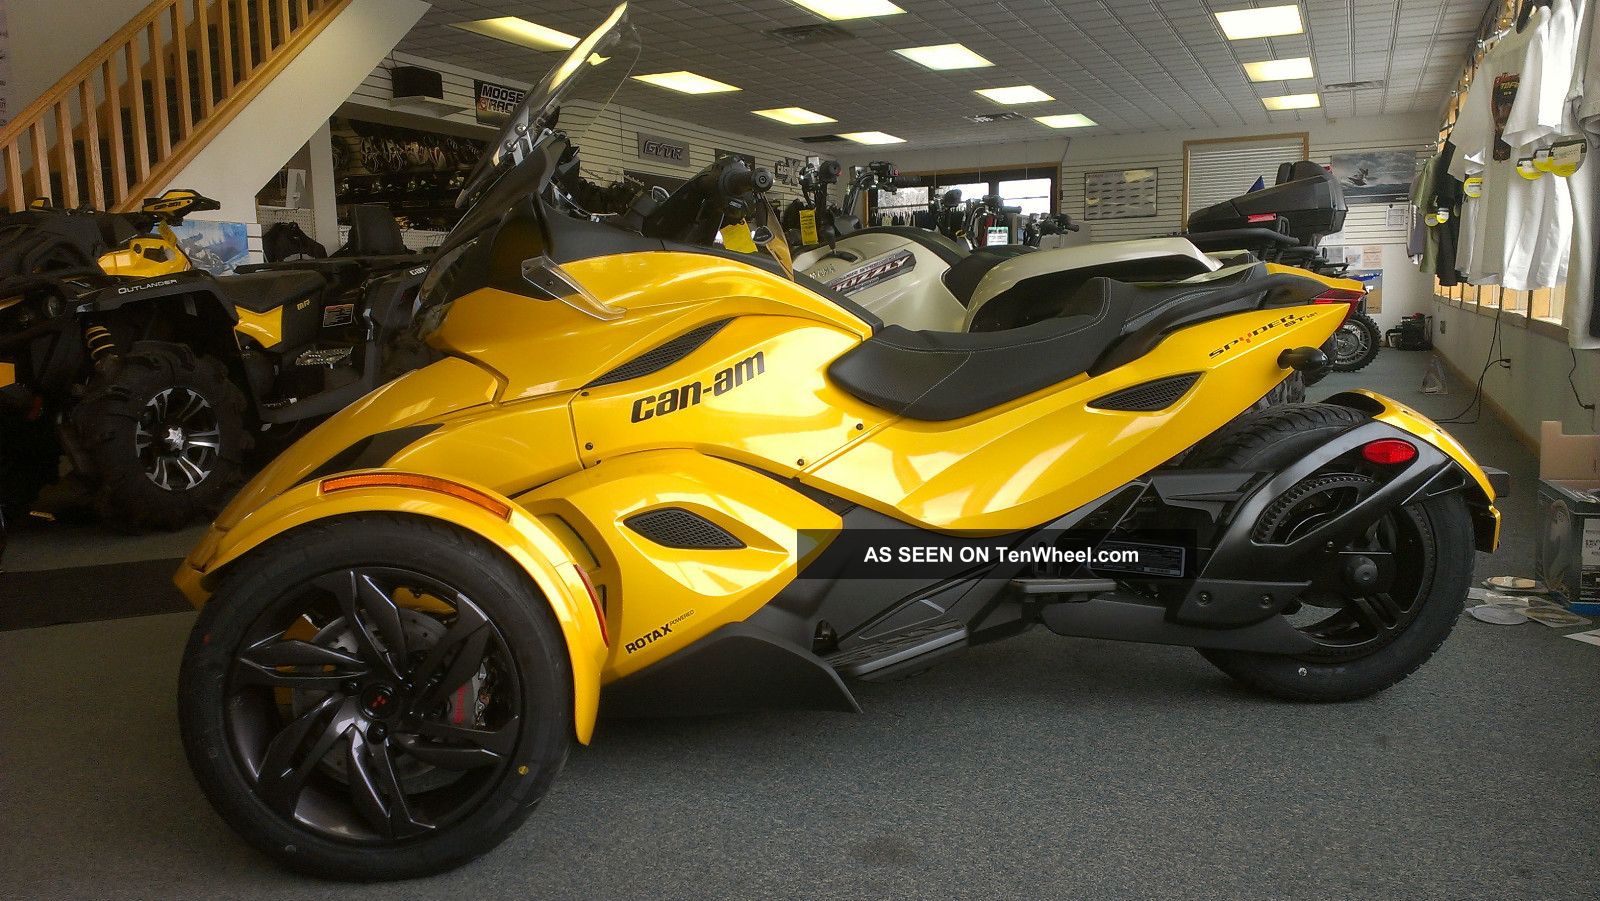 2013 Can - Am Spyder St - S Se5 Roadster -,  Other Models, Can-Am photo